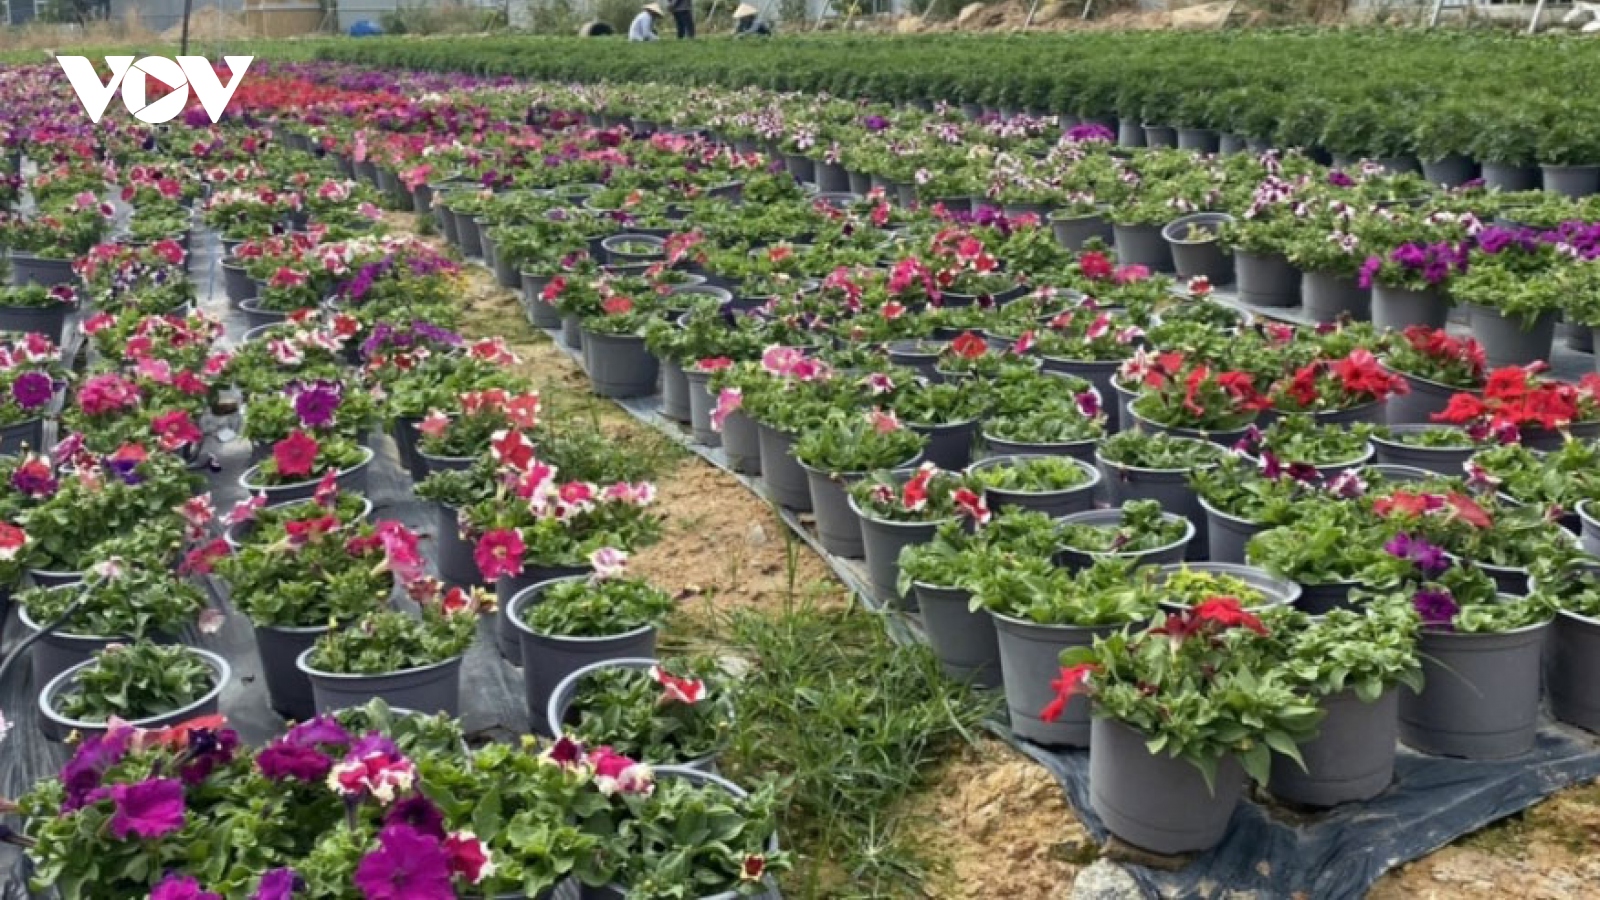 Flower farmers in Kim Dinh village hard at work ahead of Tet